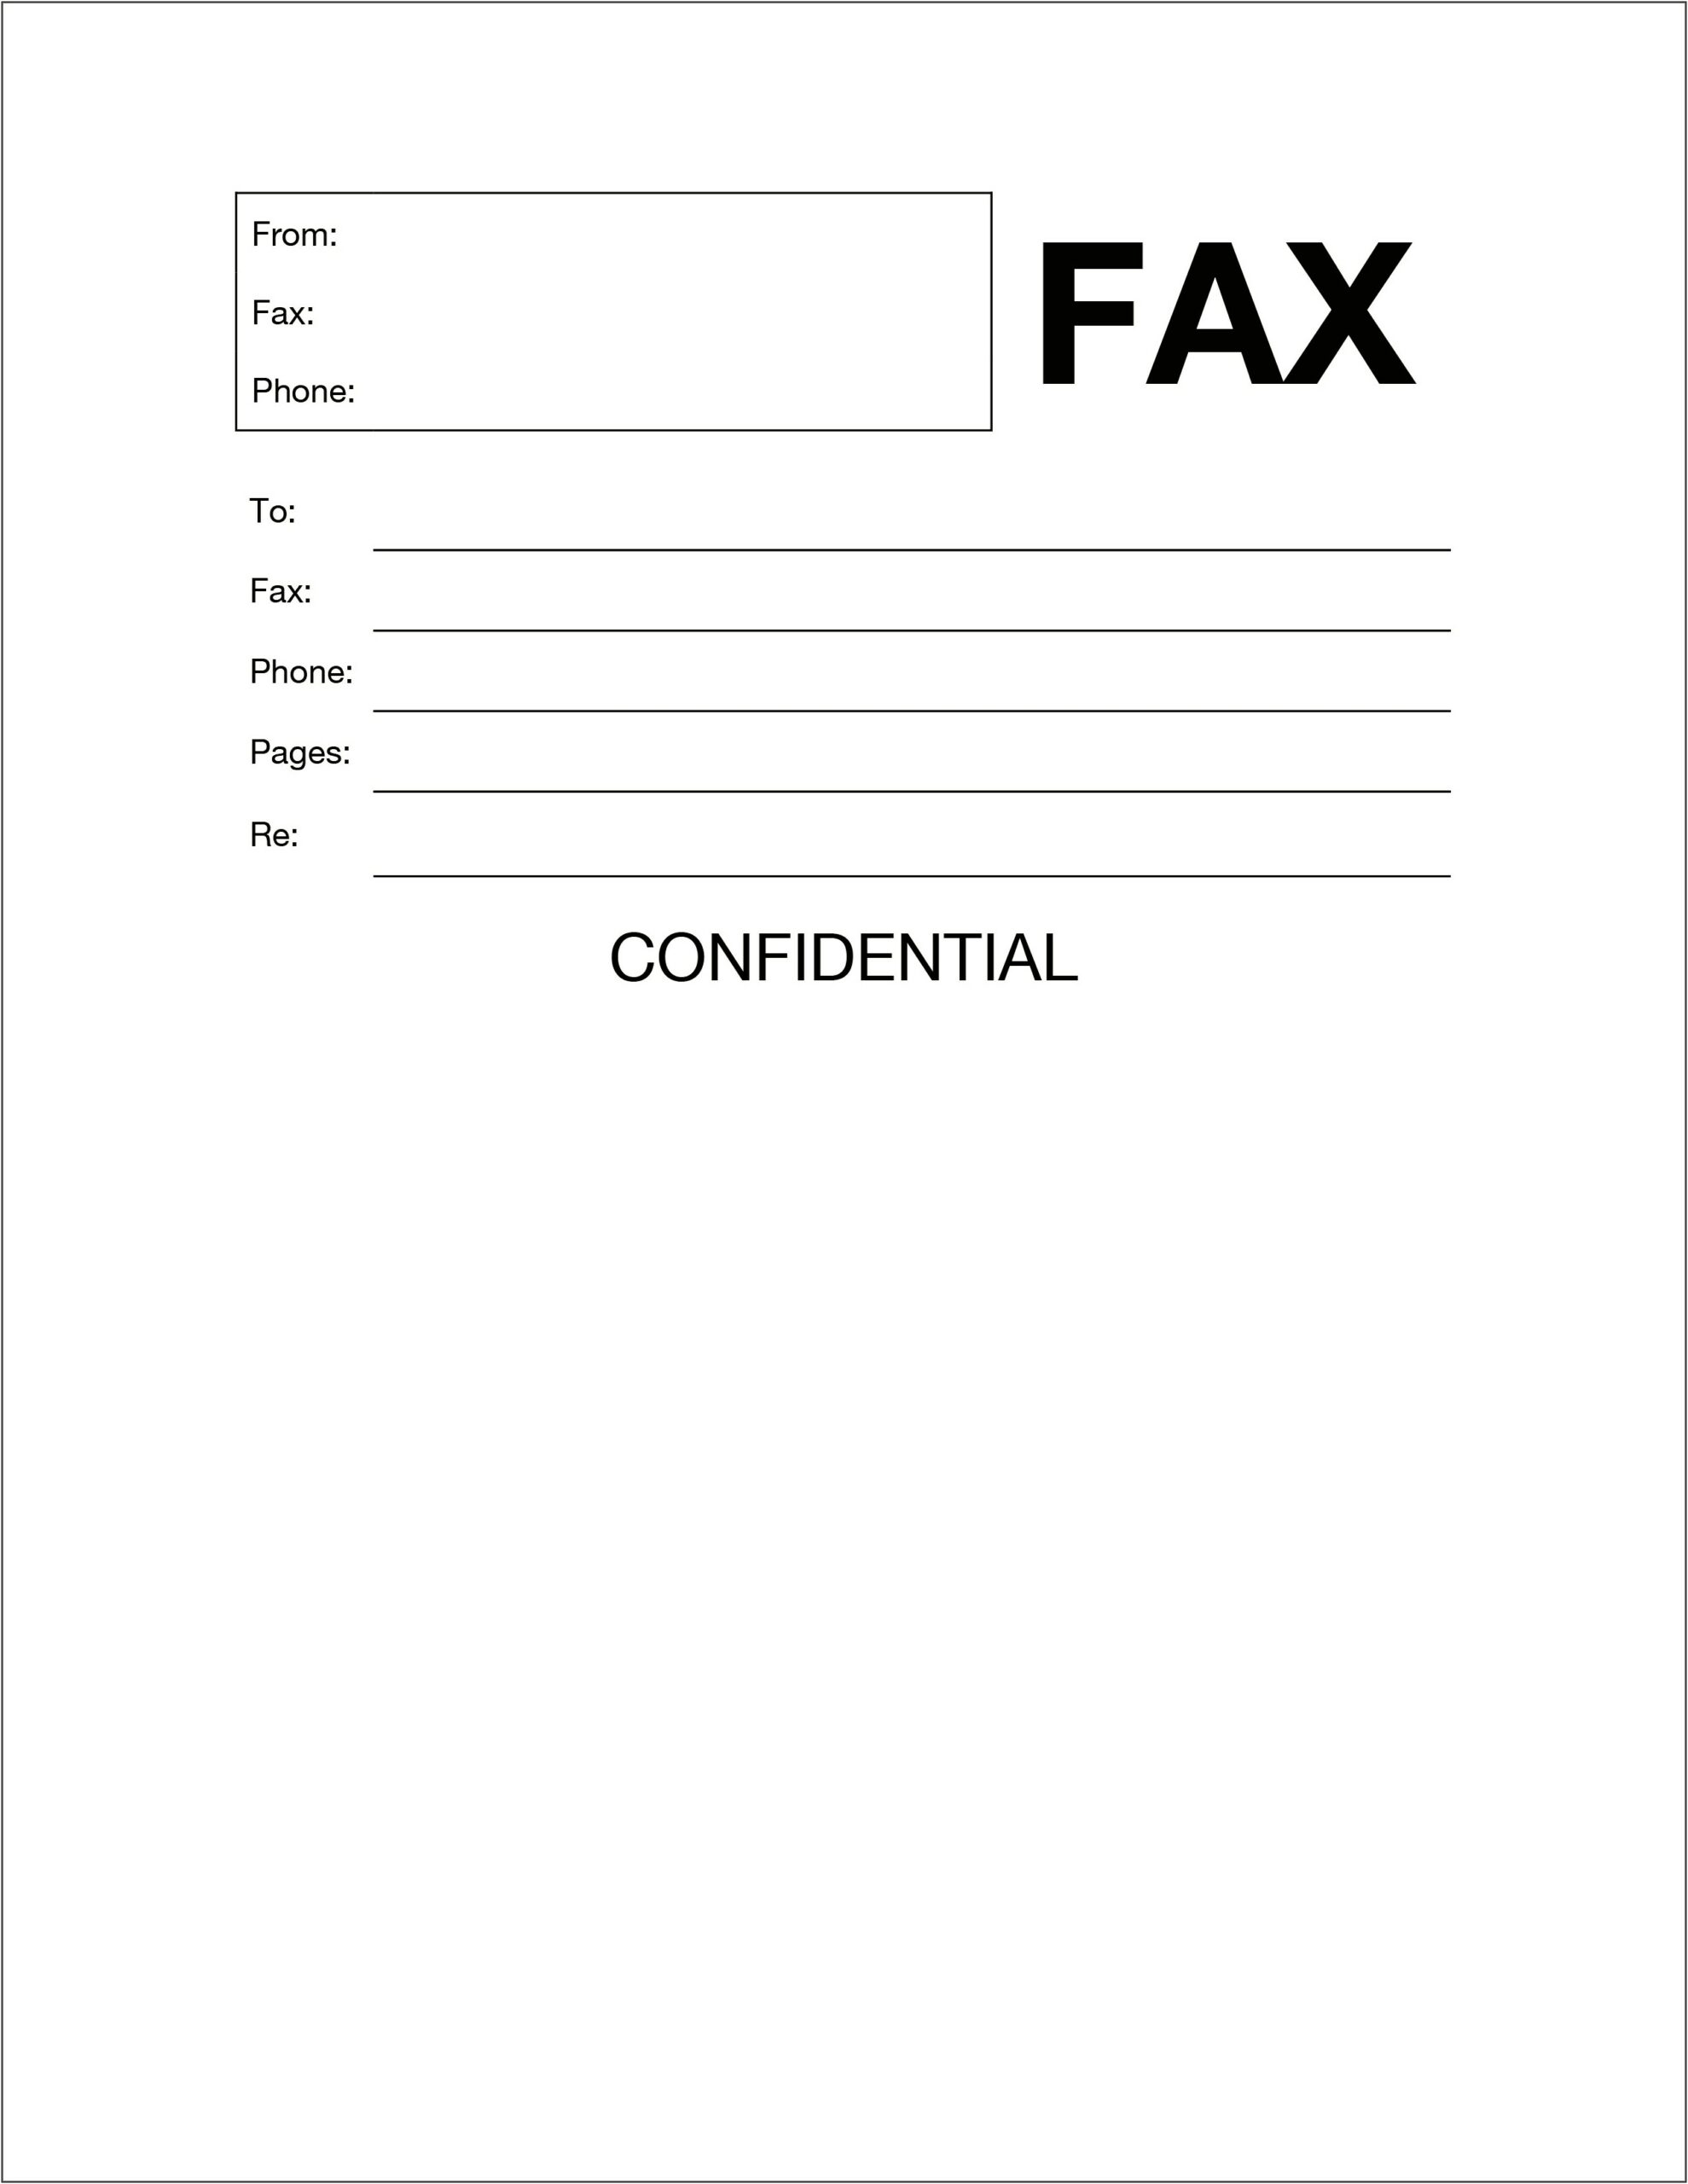 Microsoft Office Word 2007 Fax Cover Sheet Template